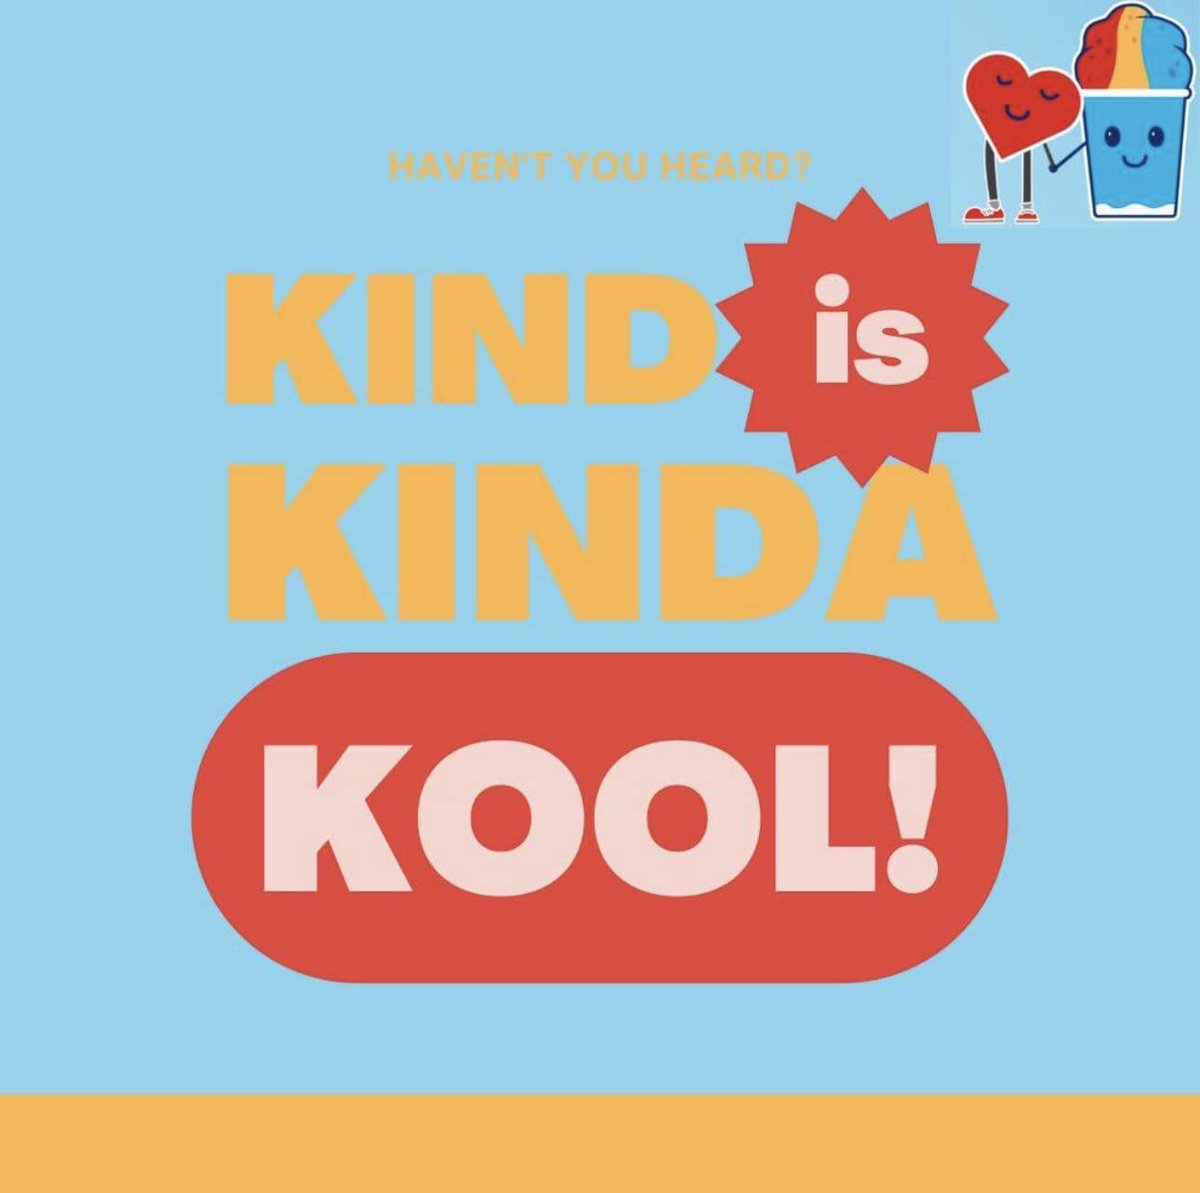 February is Random Acts of Kindness Month! 🍧🎁 Spread the love with Kona Ice at your kindness-themed events. Book us to add a cool and flavorful touch to your celebrations of compassion and goodwill. Let's make kindness contagious! 

#KindnessMonth #KonaLove